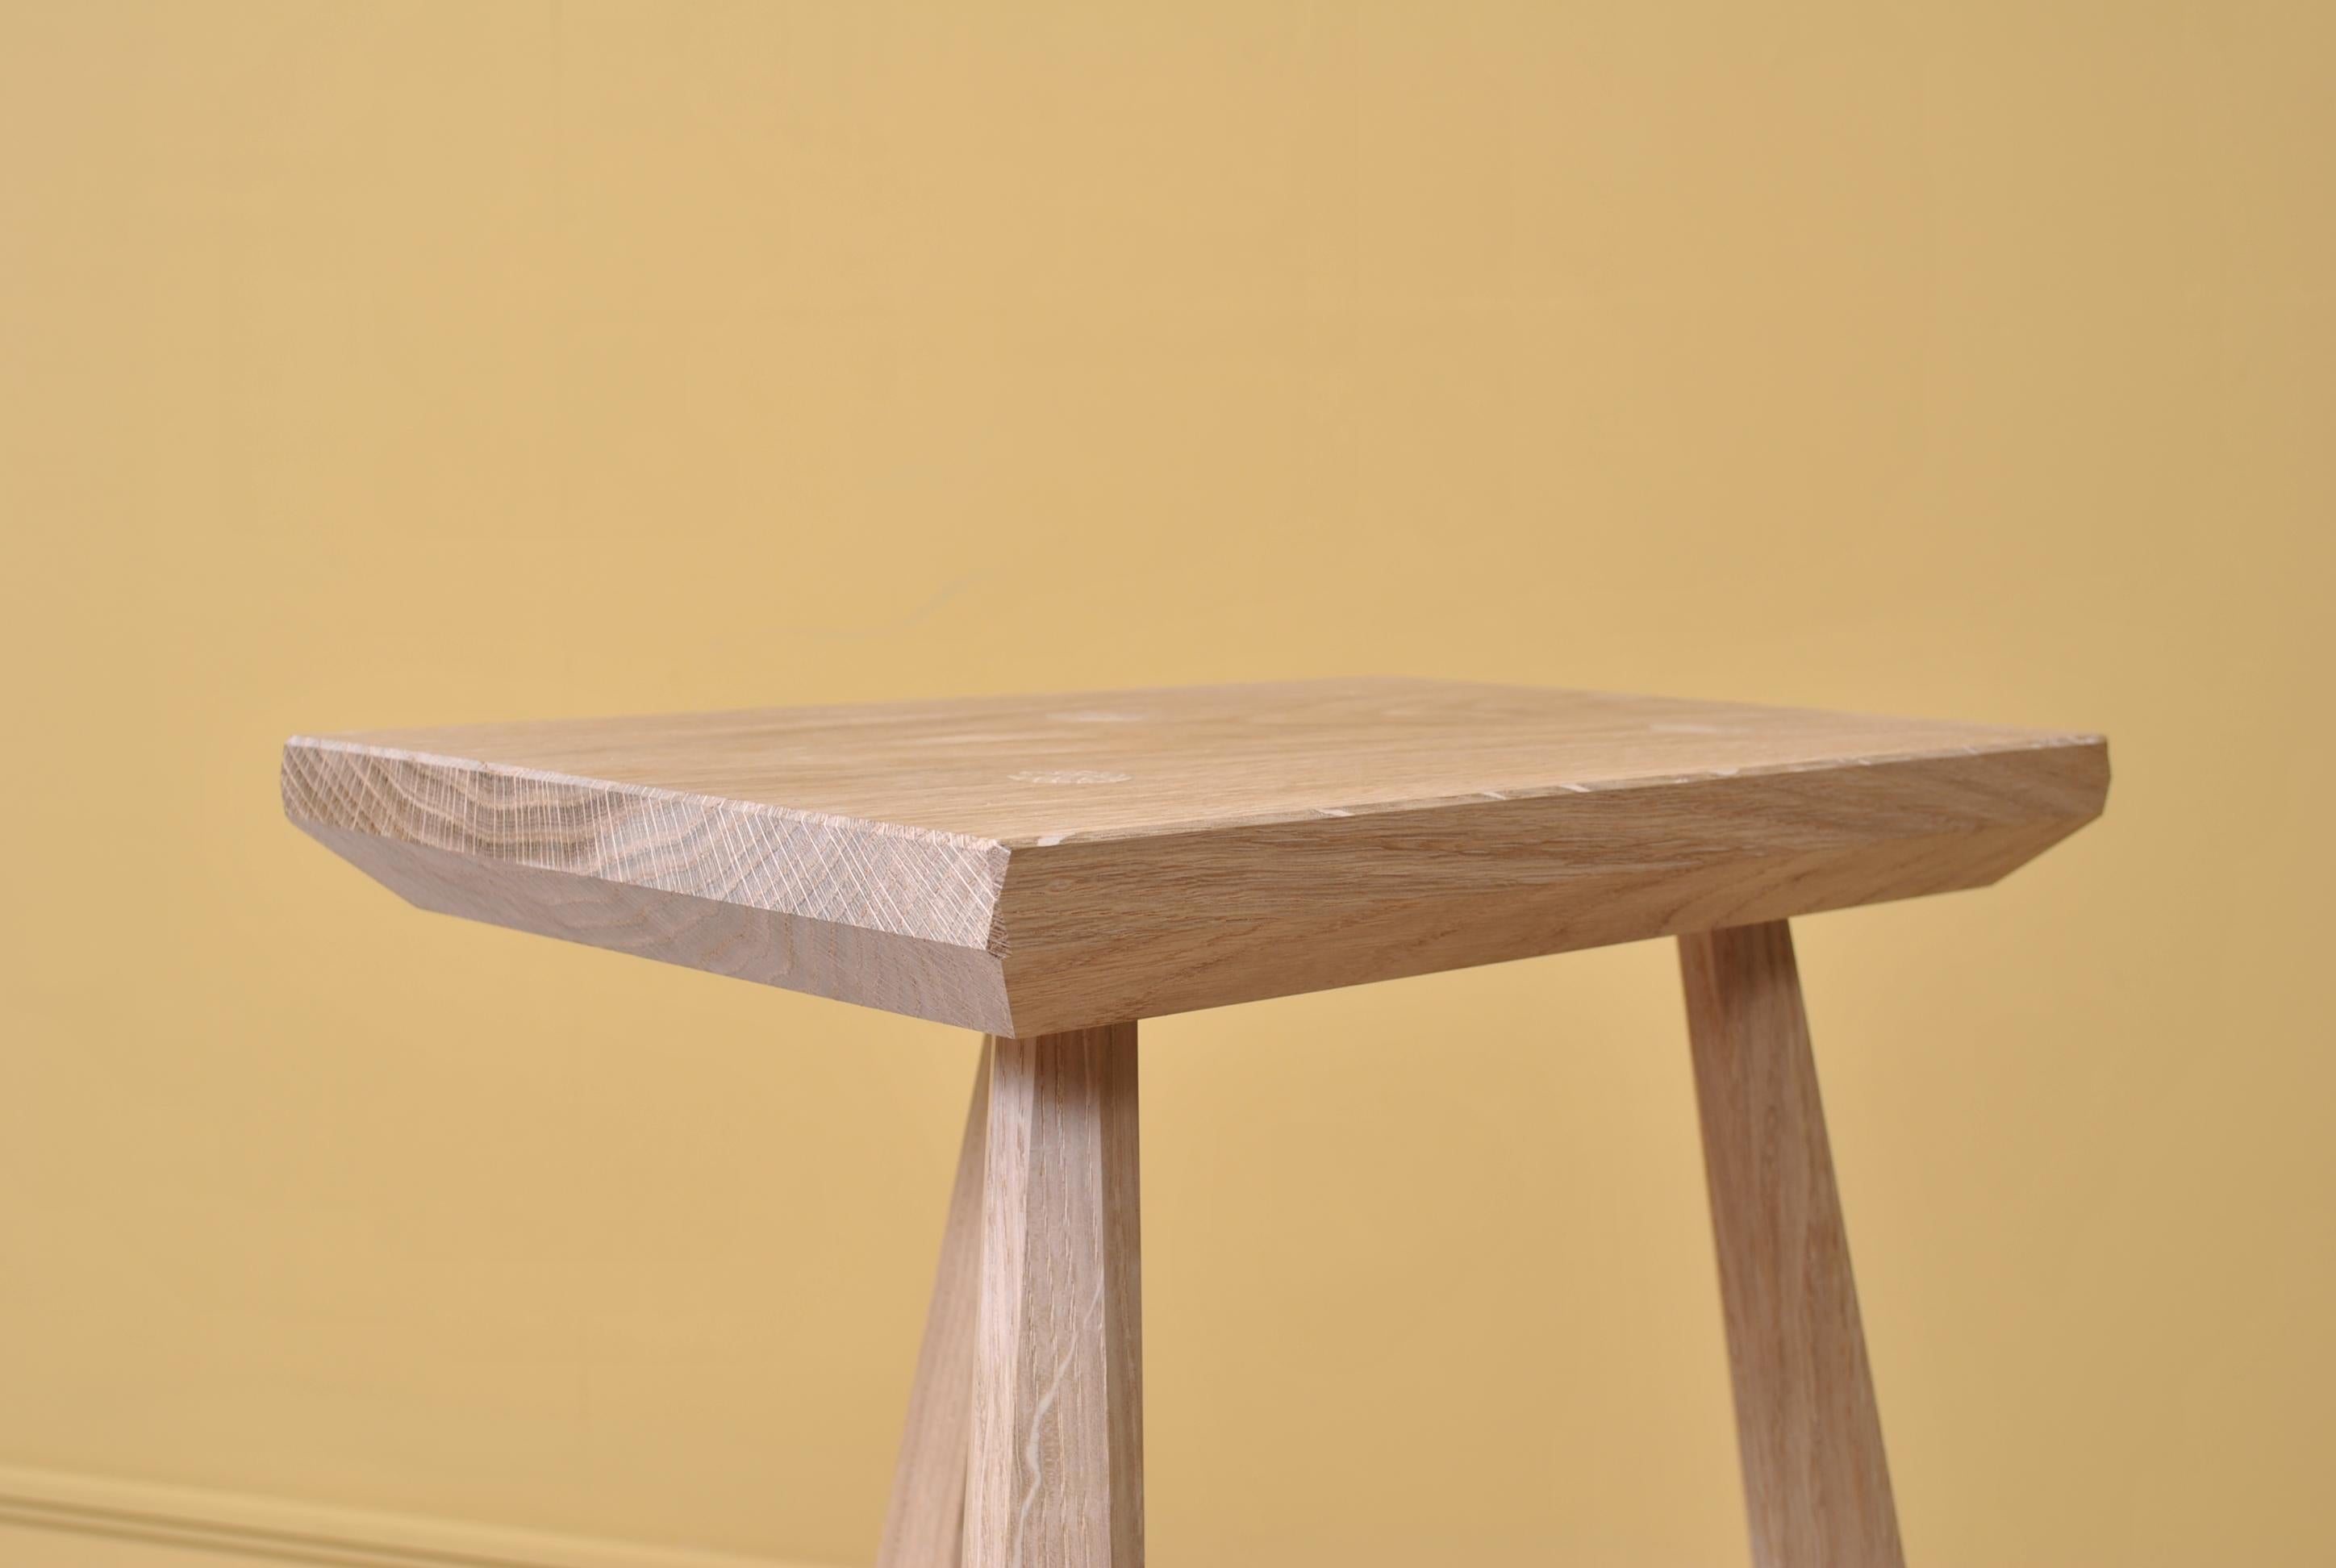 A handmade traditional staked legged milking stool by London duo Bibbings & Hensby. These examples are in raw oak but other timbers and finishes are available.
Much of Bibbings & Hensby’s work is characterized by their predominant use of hand